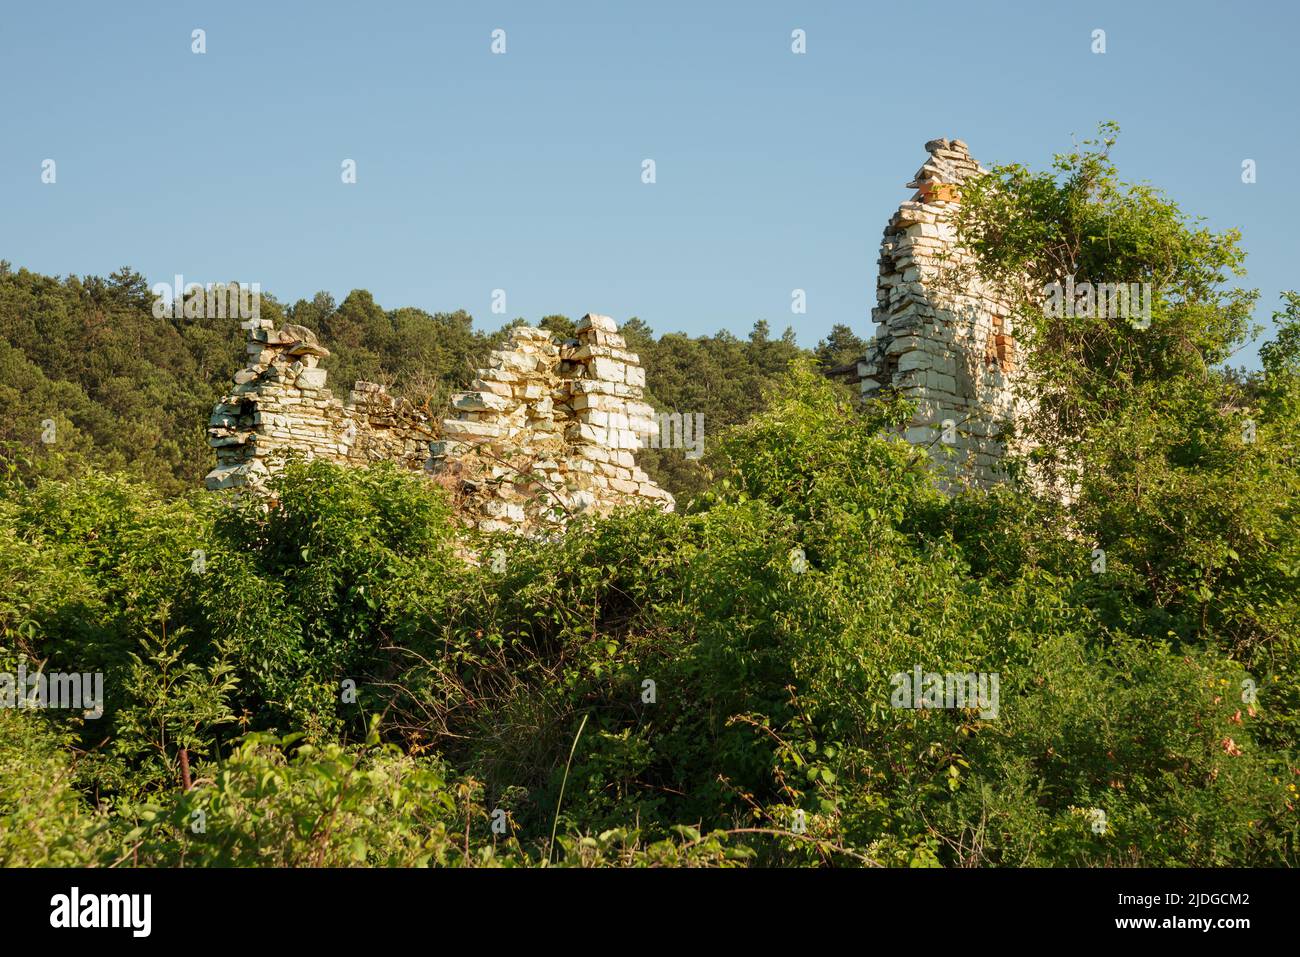 Ruin of an old stone house, in the Cesane mountains in Italy, Marche, close to Pesaro and Urbino. Various plants like broom and other herbs groe aroun Stock Photo